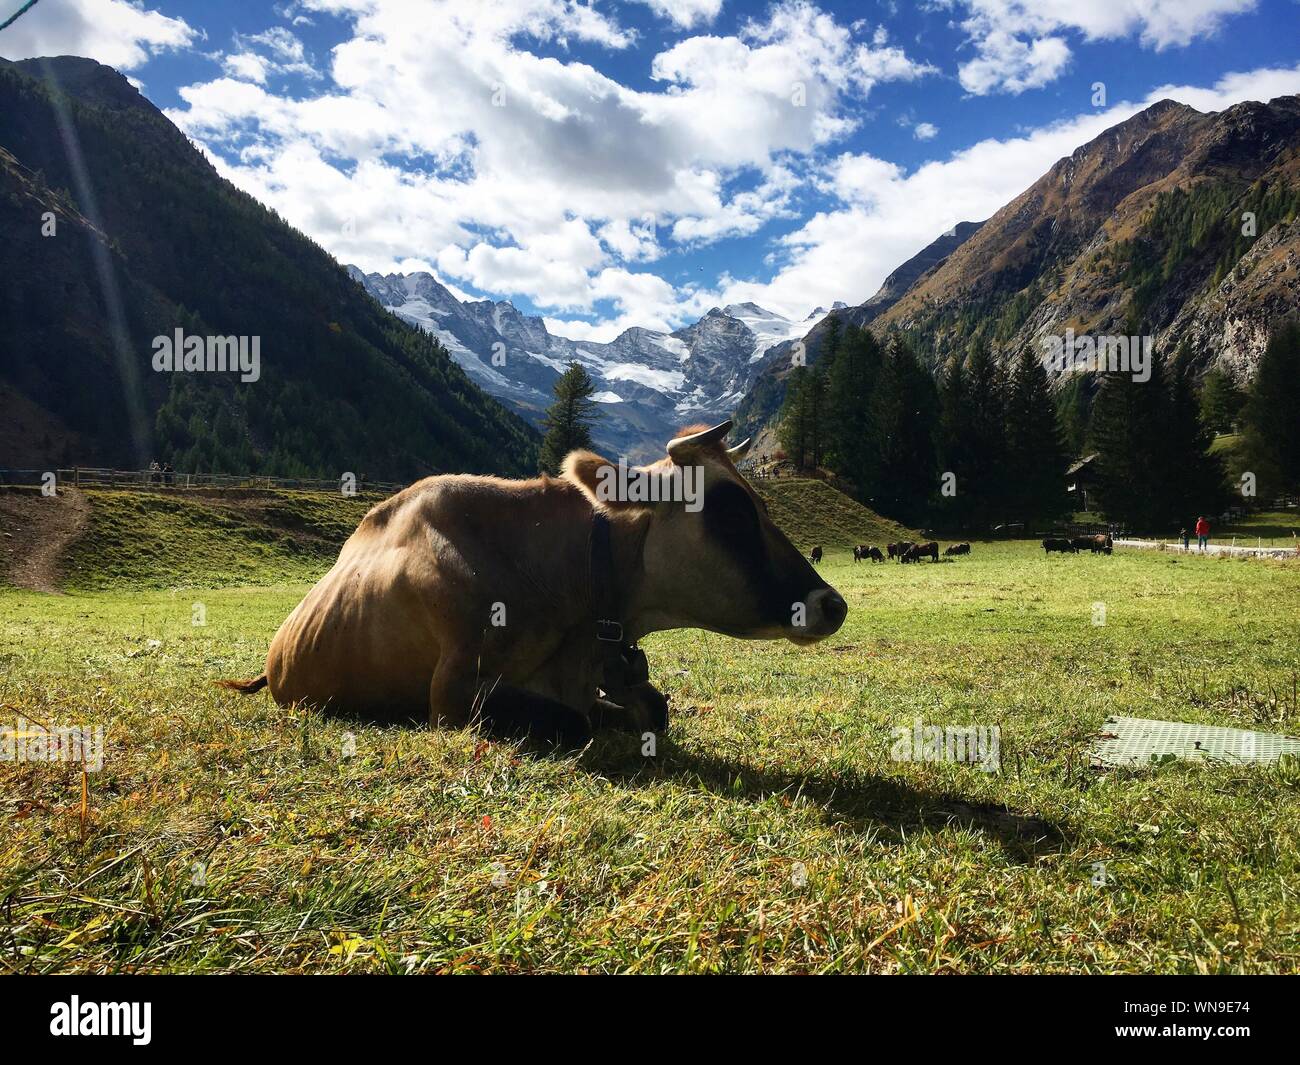 Cow Sitting On Grassy Field Against Mountains And Cloudy Sky Stock Photo